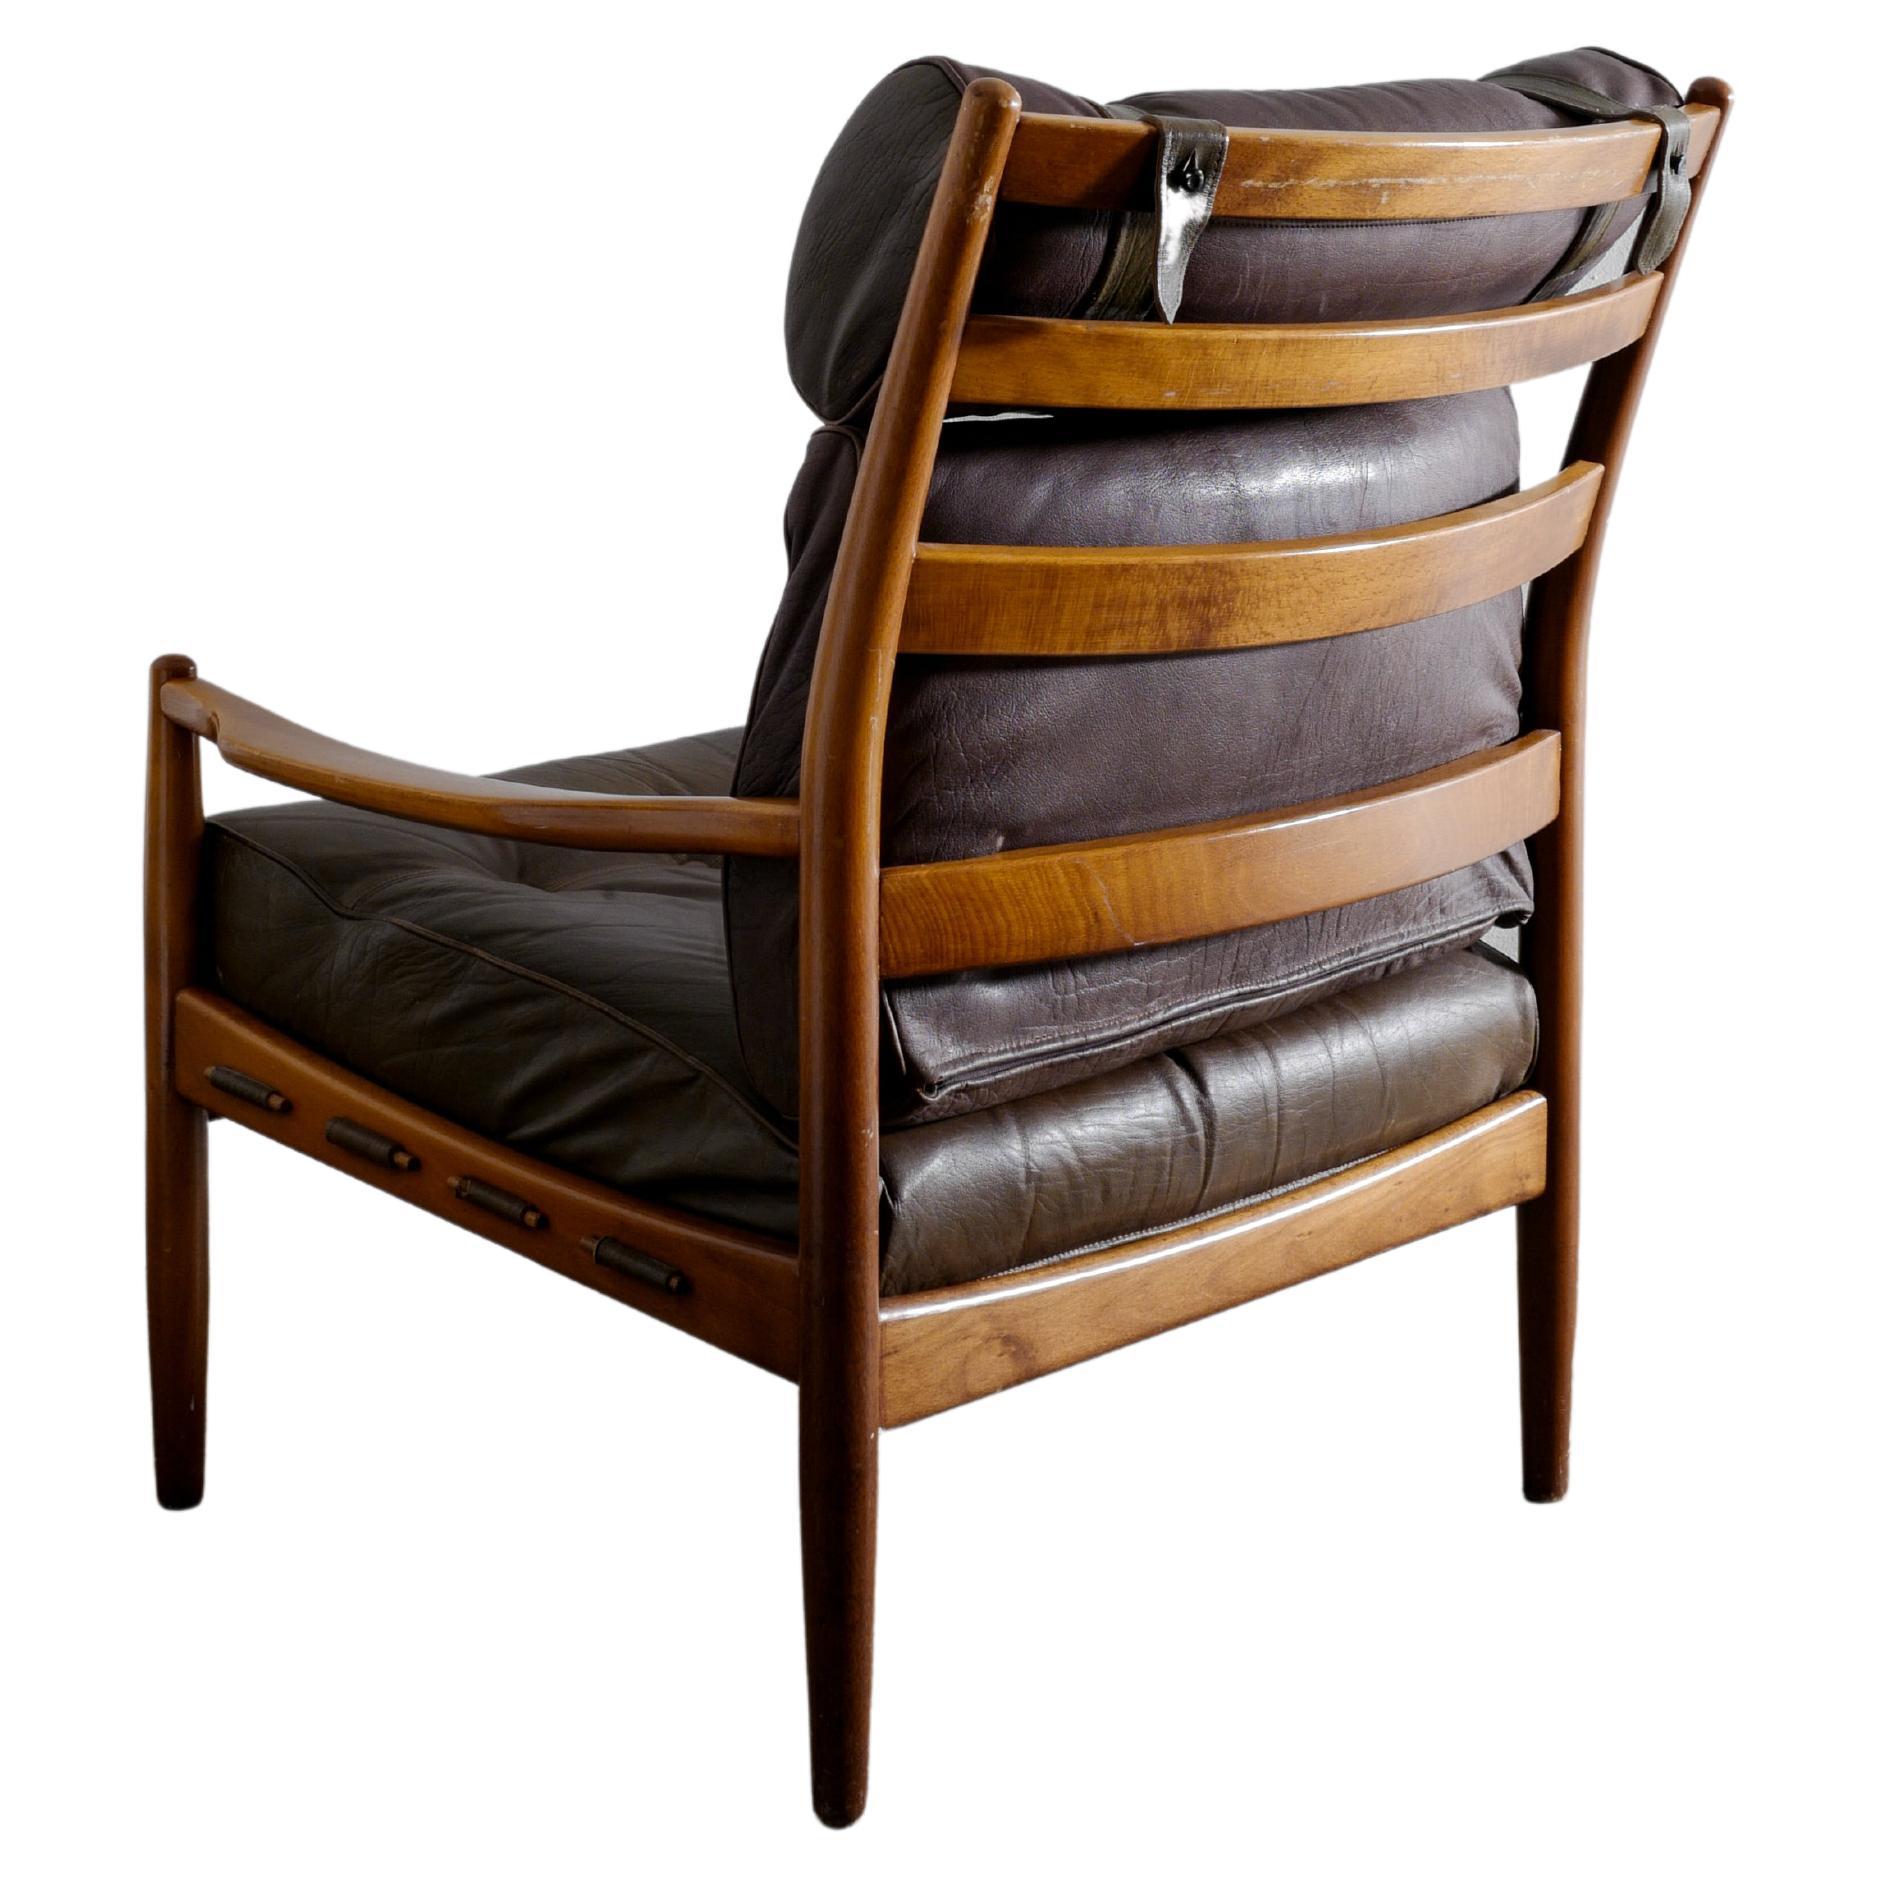 Leather Arm Easychair by Ingemar Thillmark Produced by OPE Möbler, Sweden, 1960s For Sale